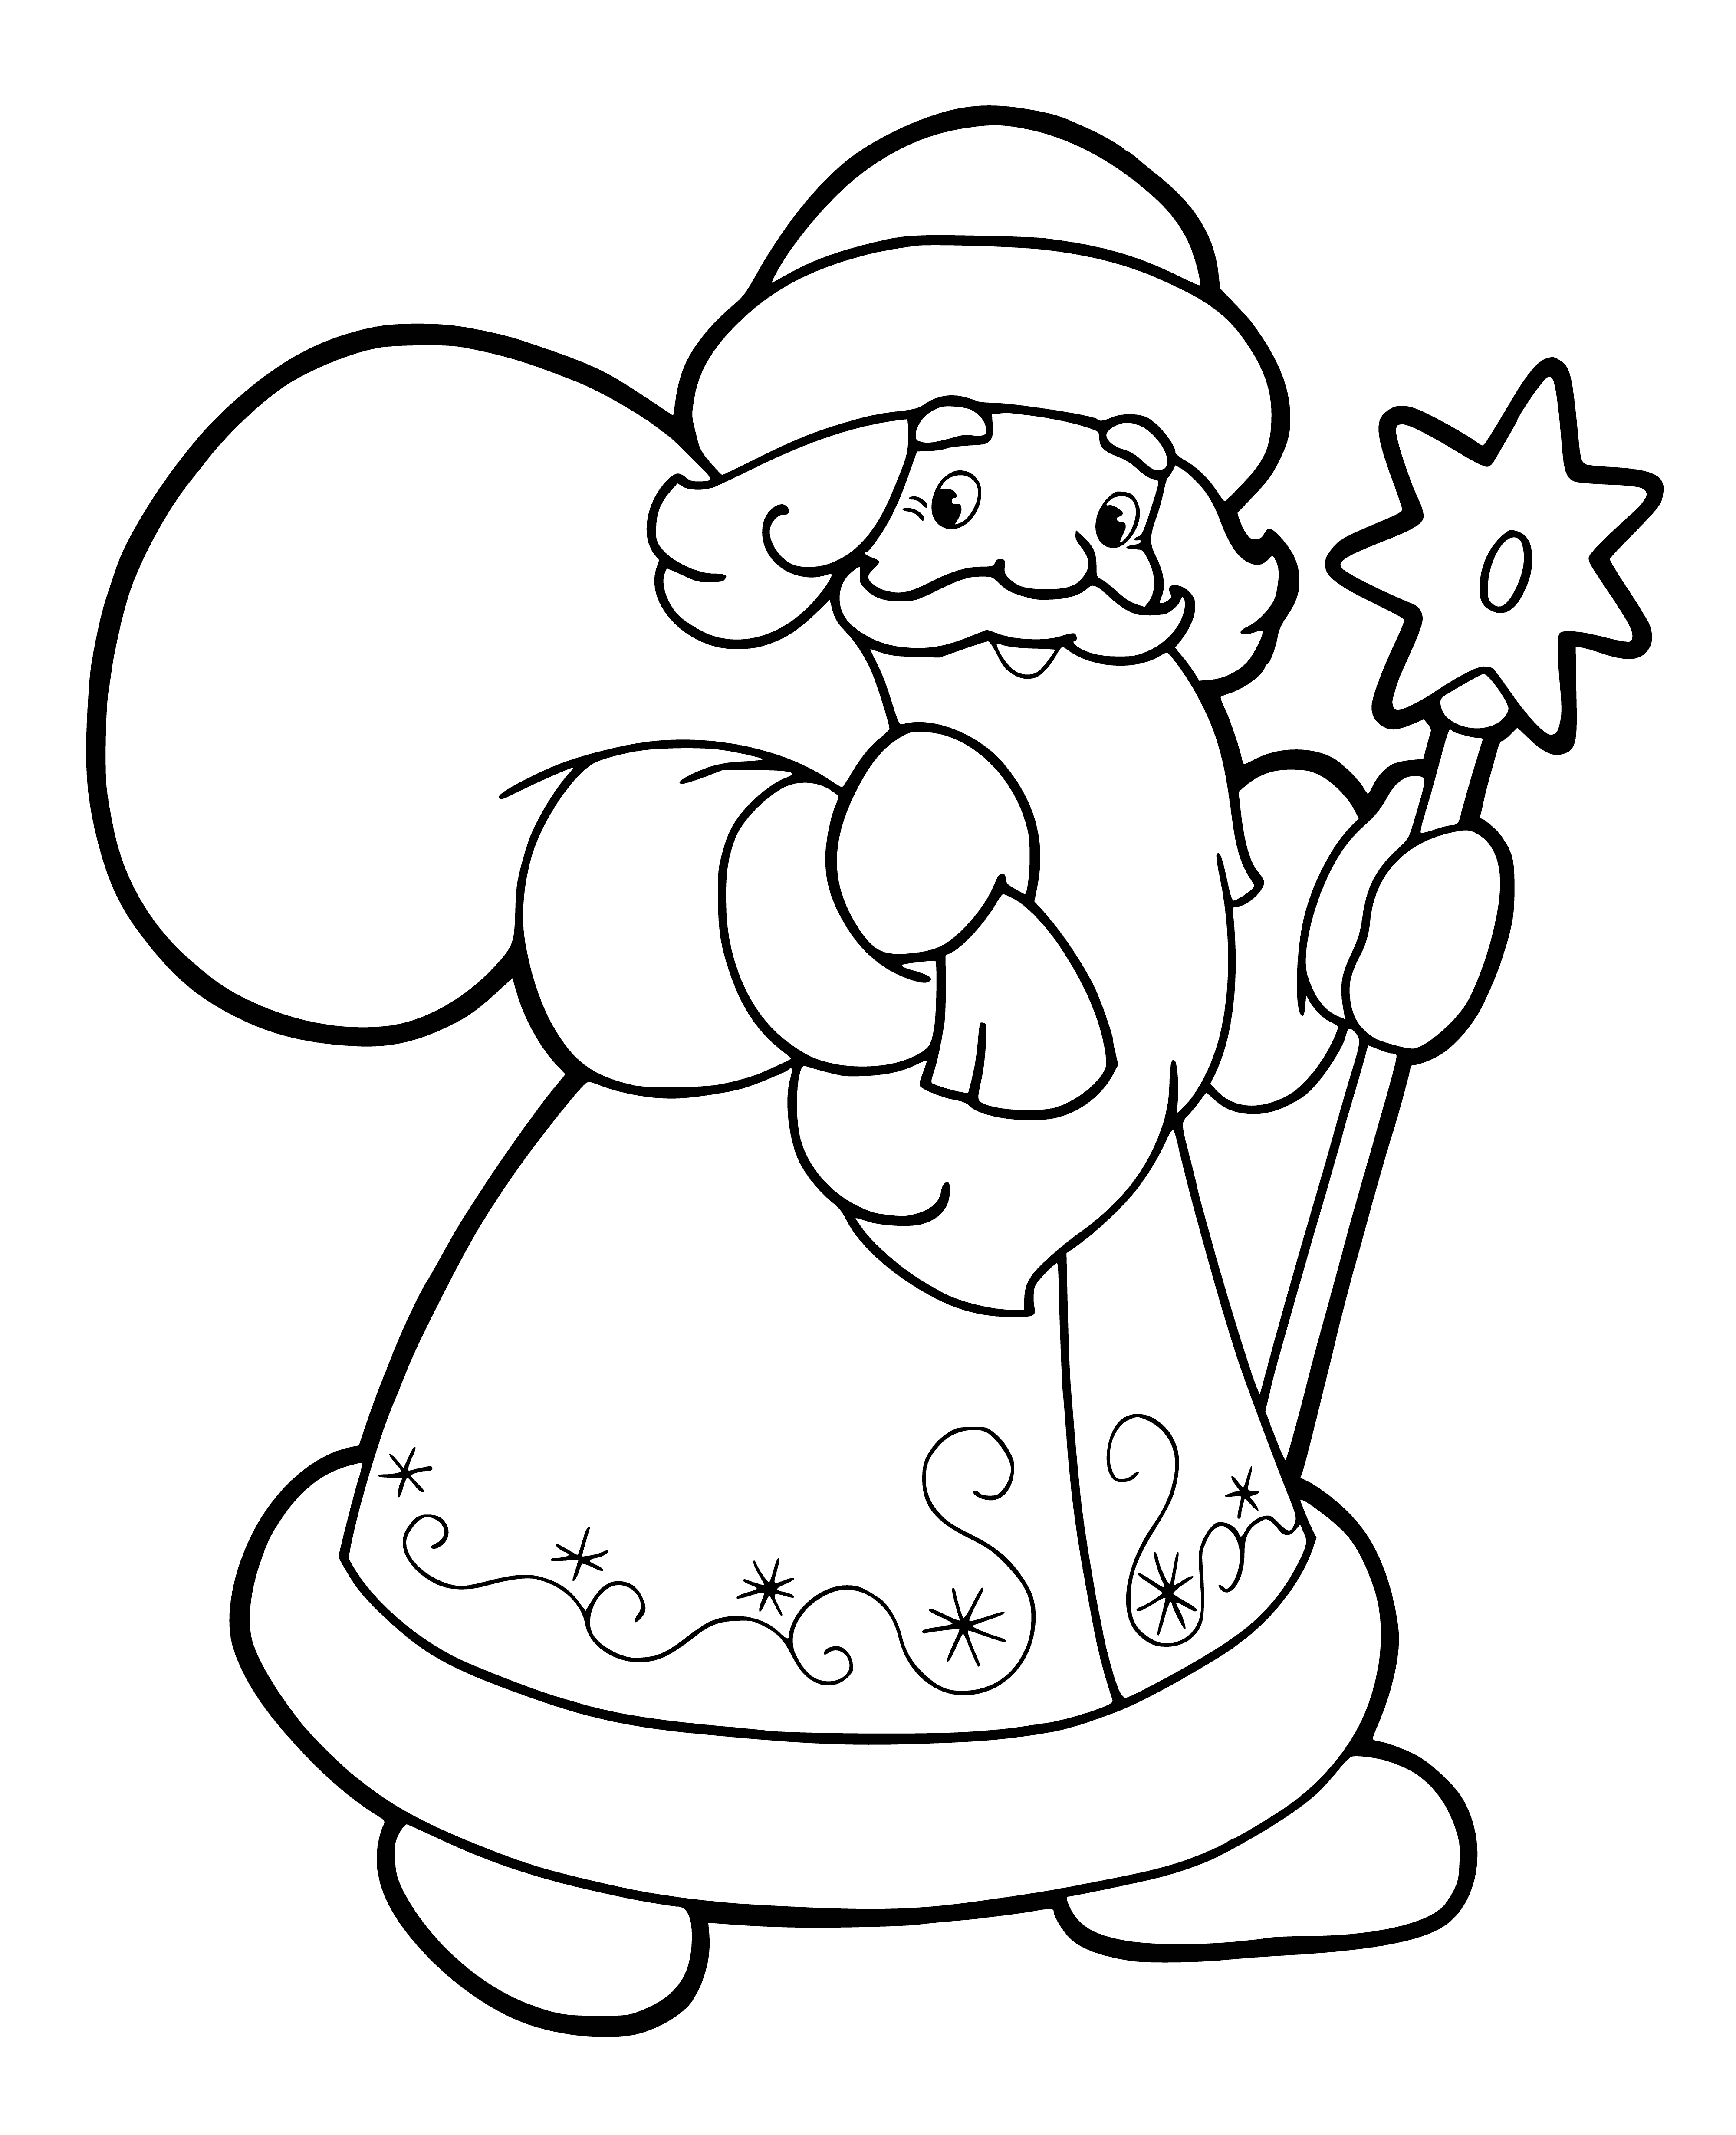 coloring page: Santa Claus is an elderly man with a long white beard, red fur-trimmed coat & hat, & a sack of gifts.